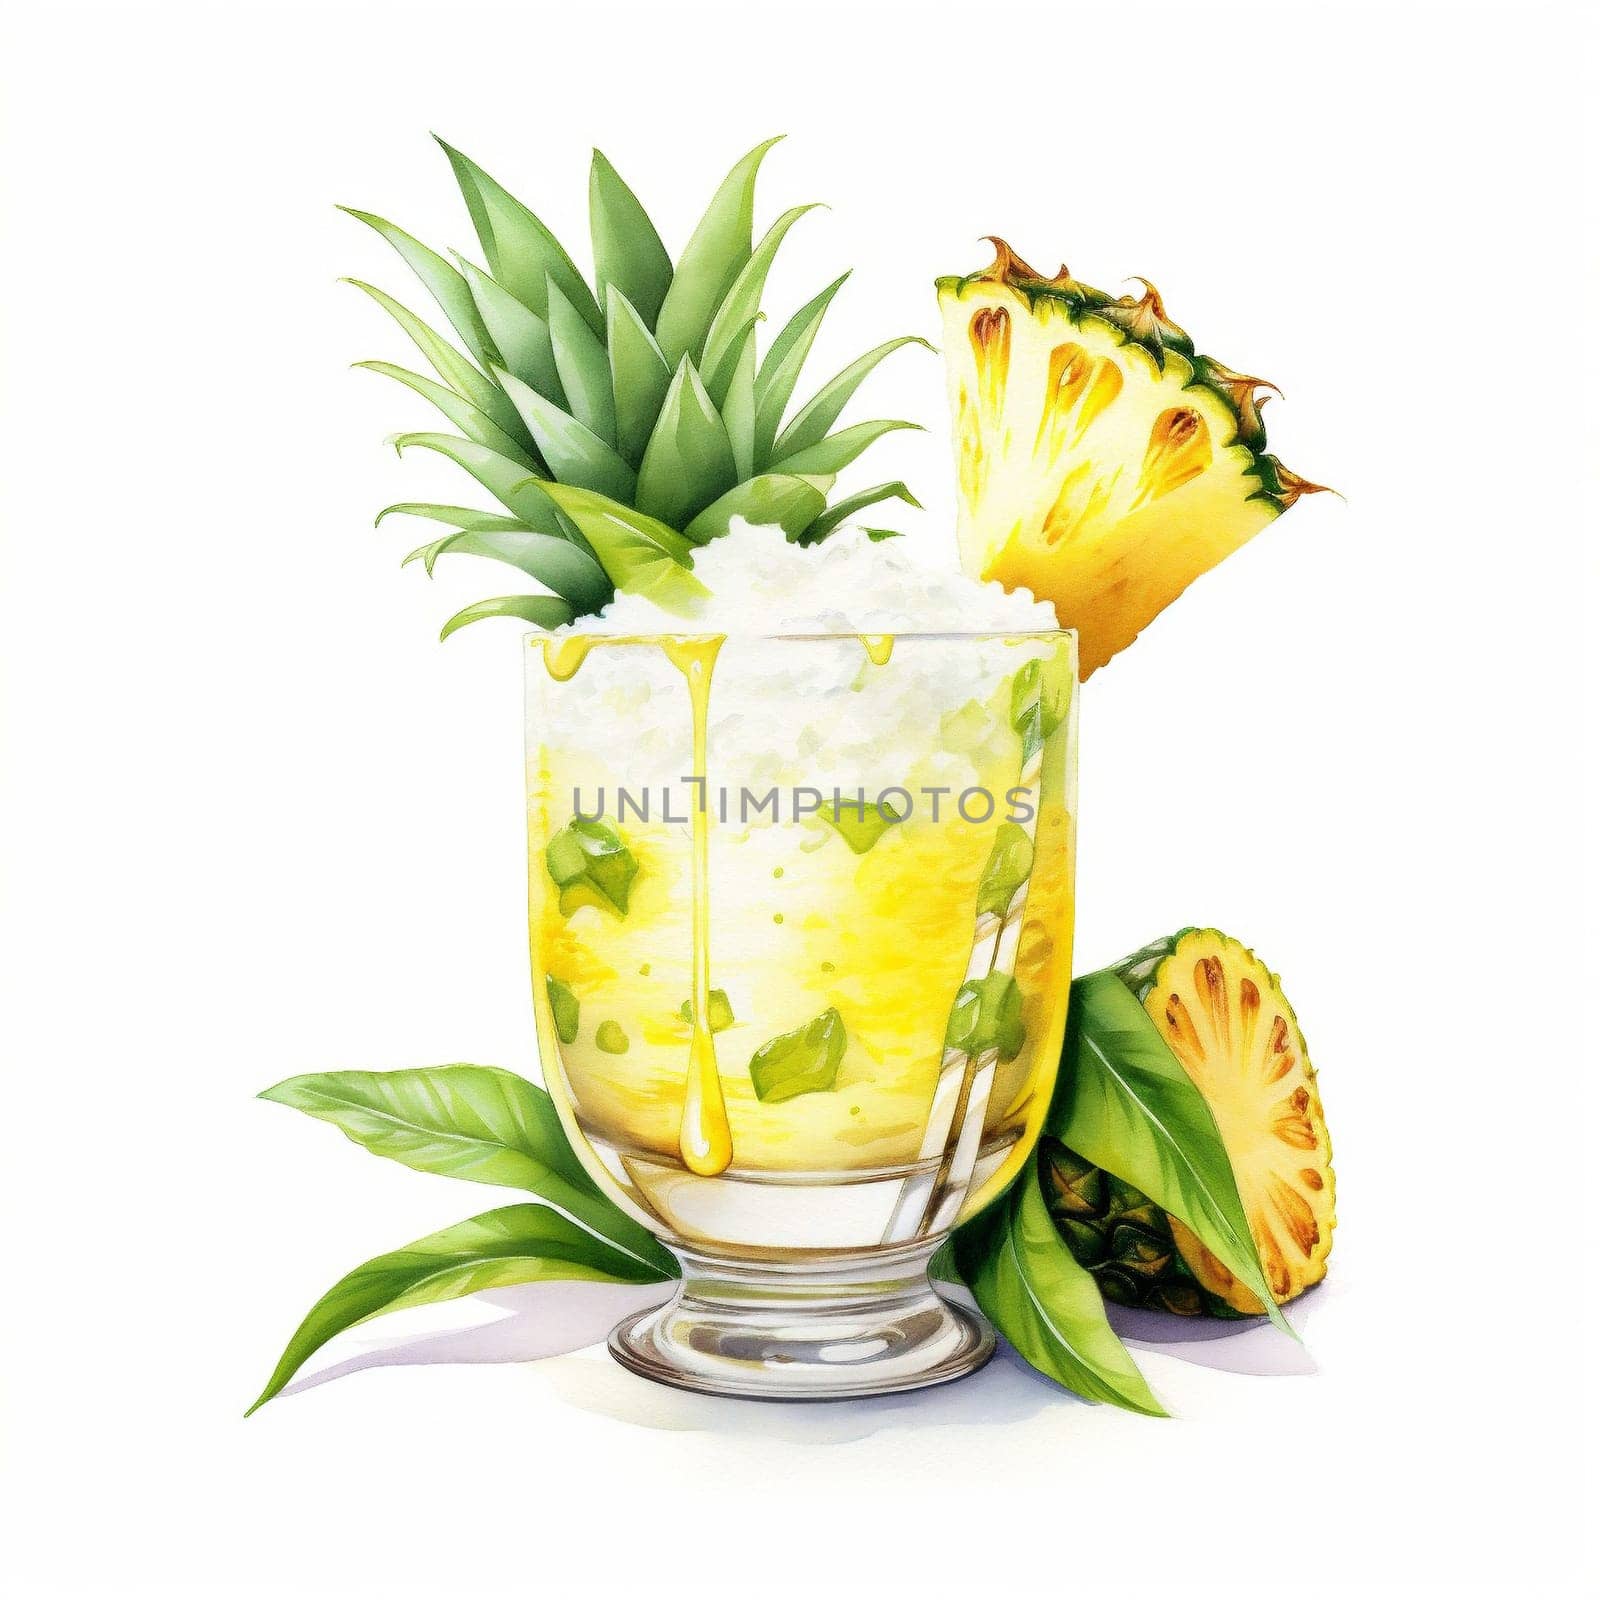 Pina Colada Cocktail Day with Pineapple and Ice. by Rina_Dozornaya